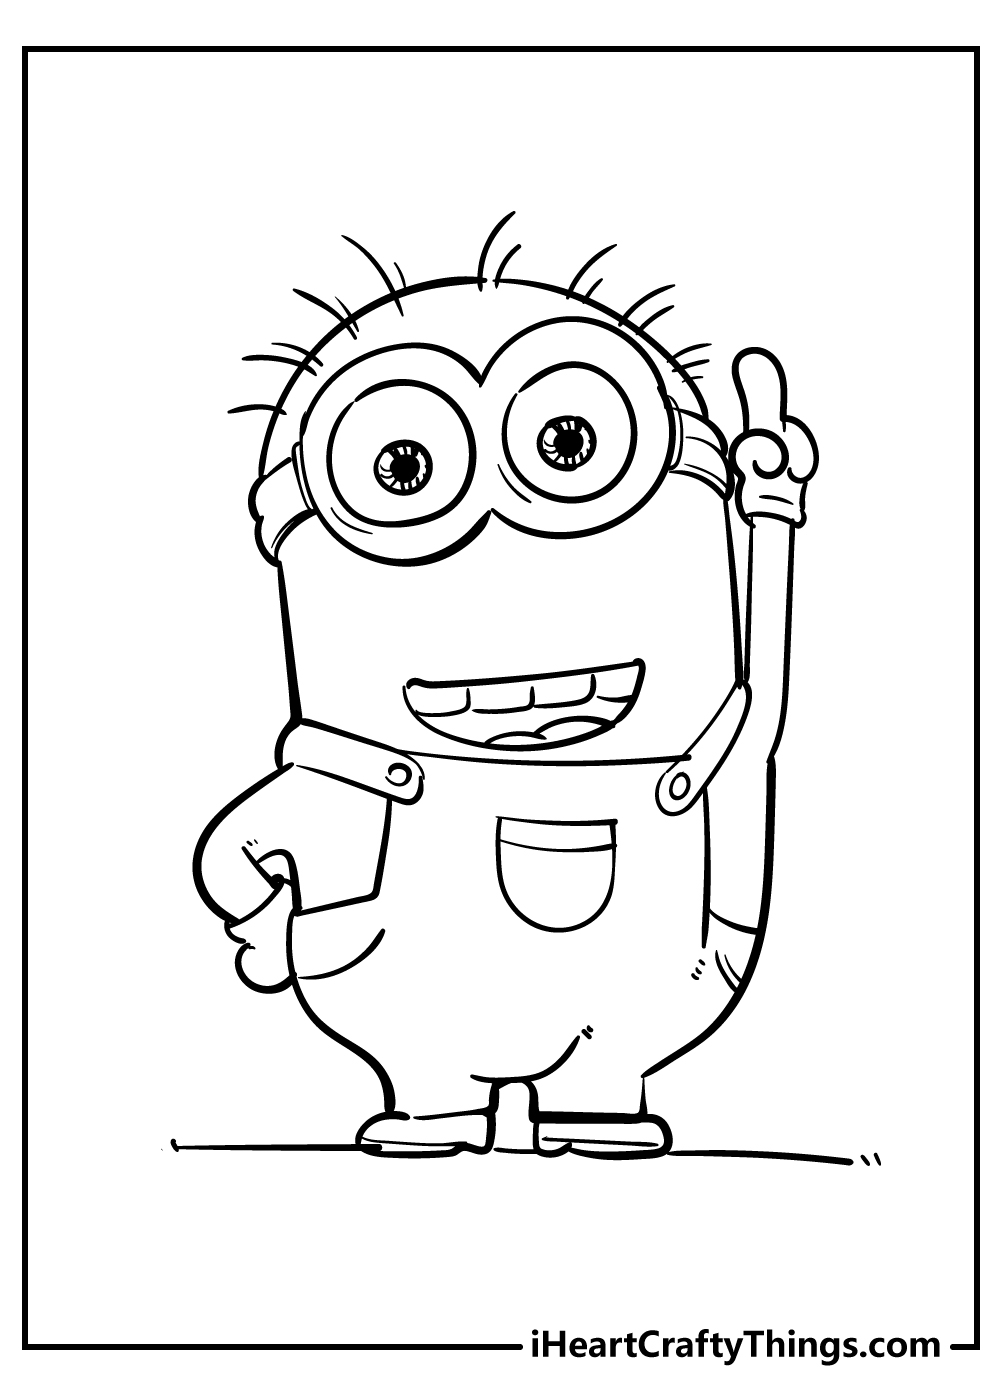 Minions Coloring Original Sheet for children free download